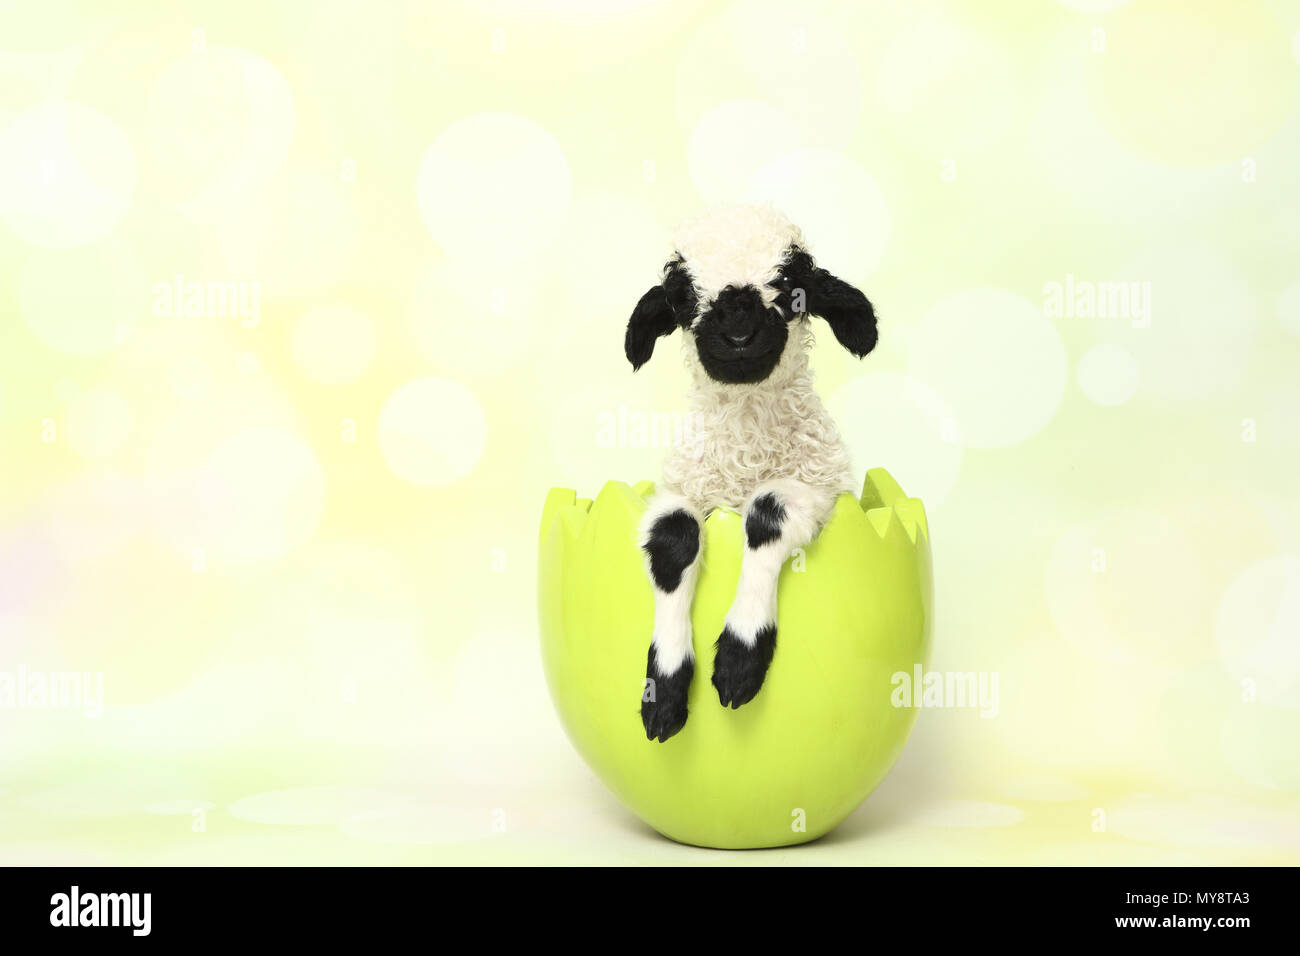 Valais Blacknose Sheep. Lamb (10 days old) in a decorative pot, shaped like an eggshell. Studio picture against a light-green background. Germany Stock Photo